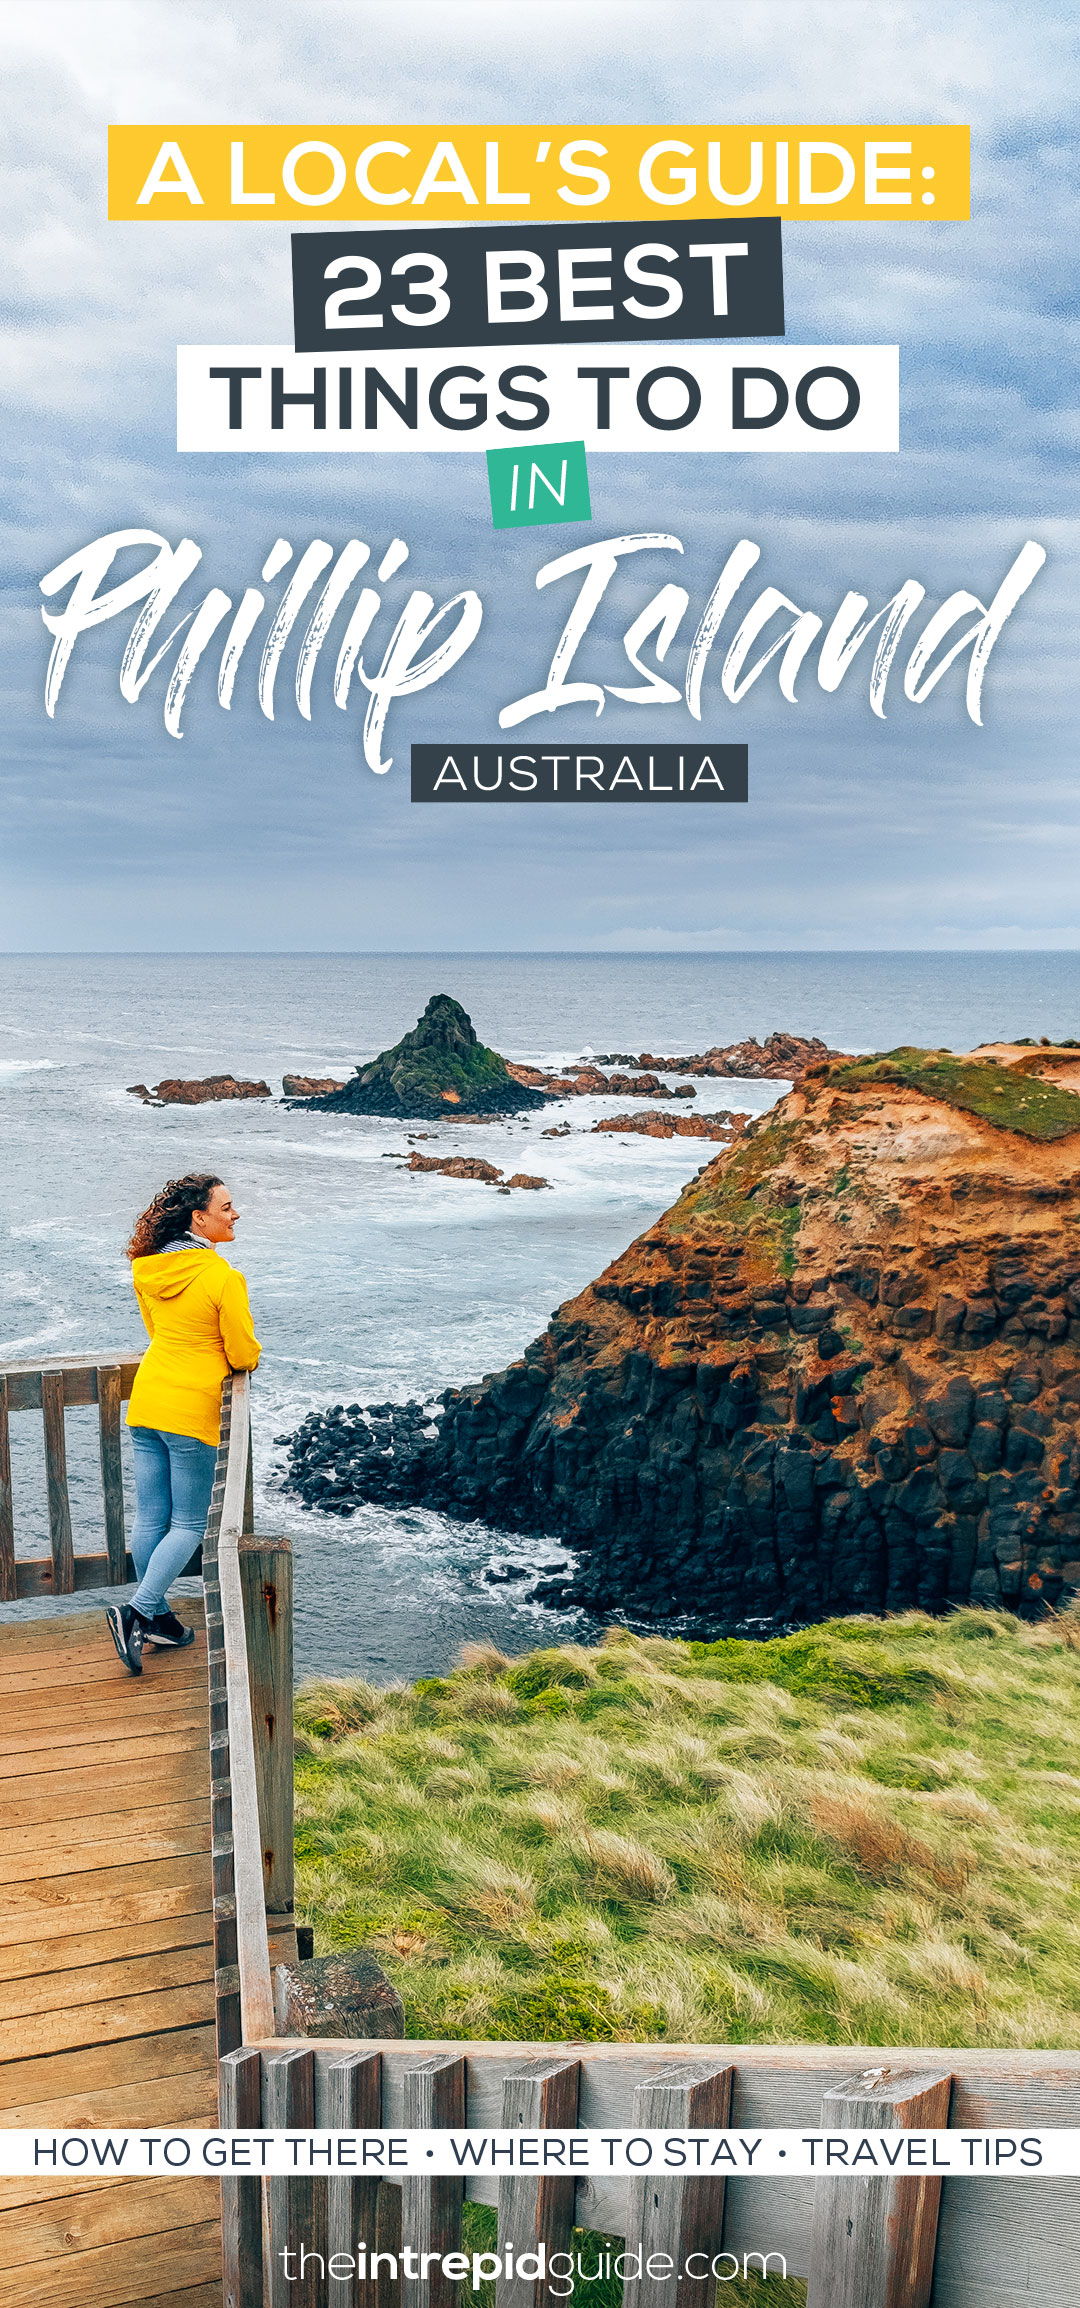 23 Best things to do in Phillip Island, Australia - Where to stay, how to get their, itinerary, travel tips